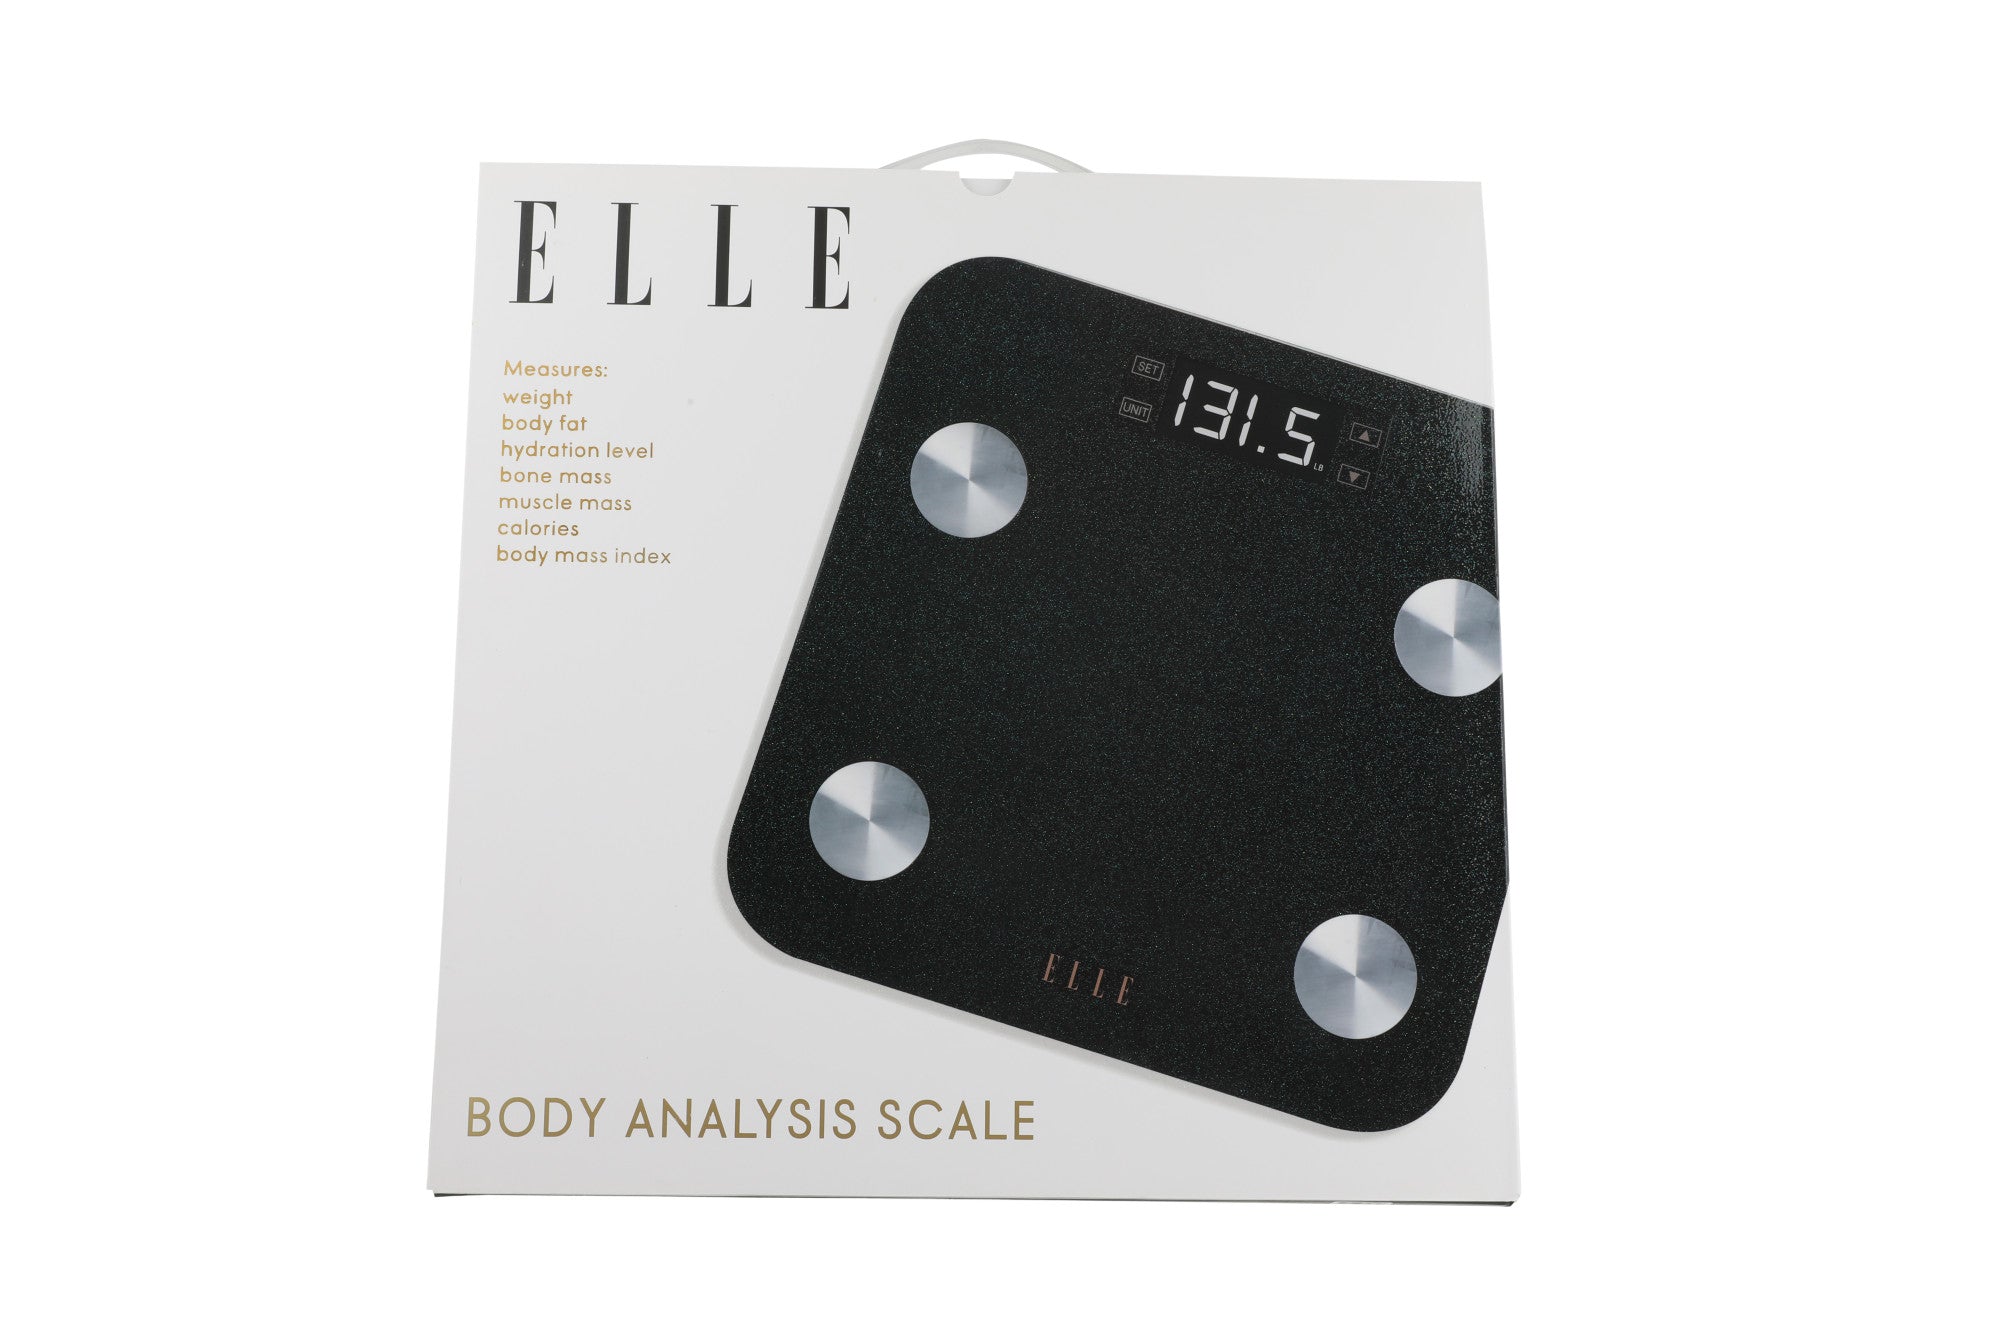 ELLE Body Analysis Scale for Body Weight, Digital Weight Scale for Bathroom  with BMI Analyzer and 7 Fitness Indicators, Including Body Fat, Hydration